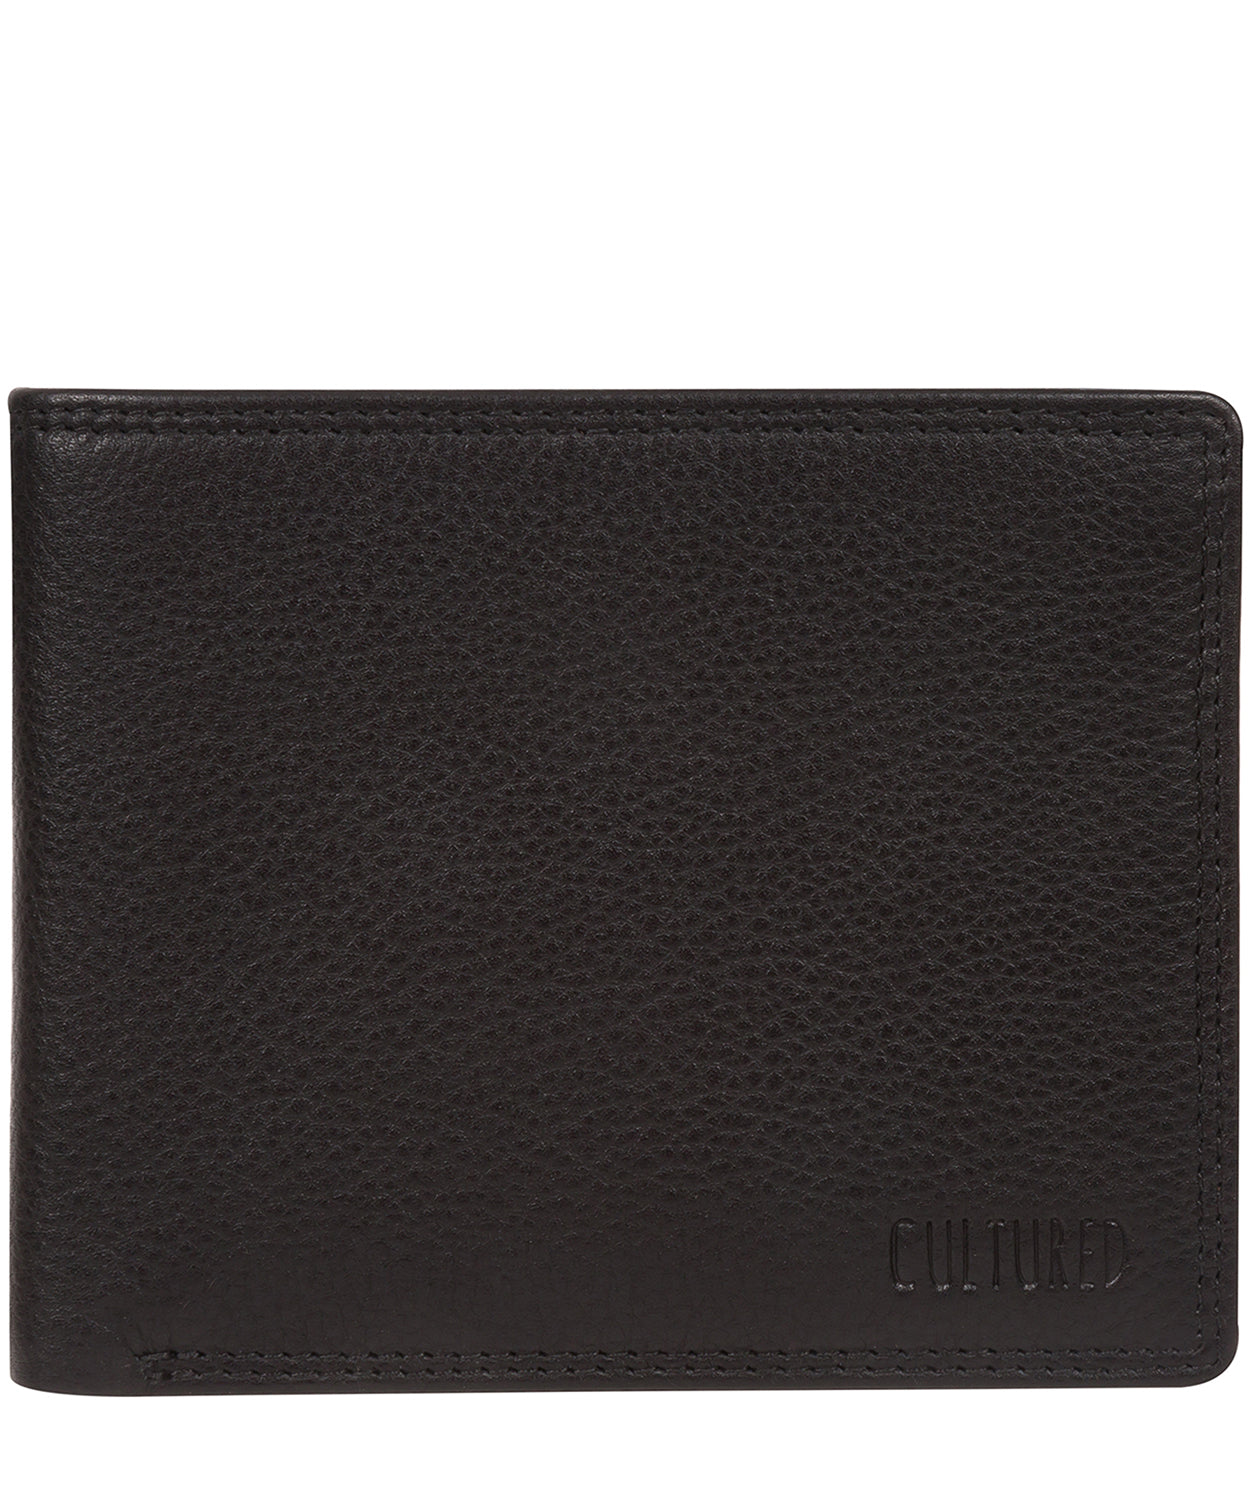 Black Leather BiFold Wallet 'Richard' by Cultured London – Pure ...